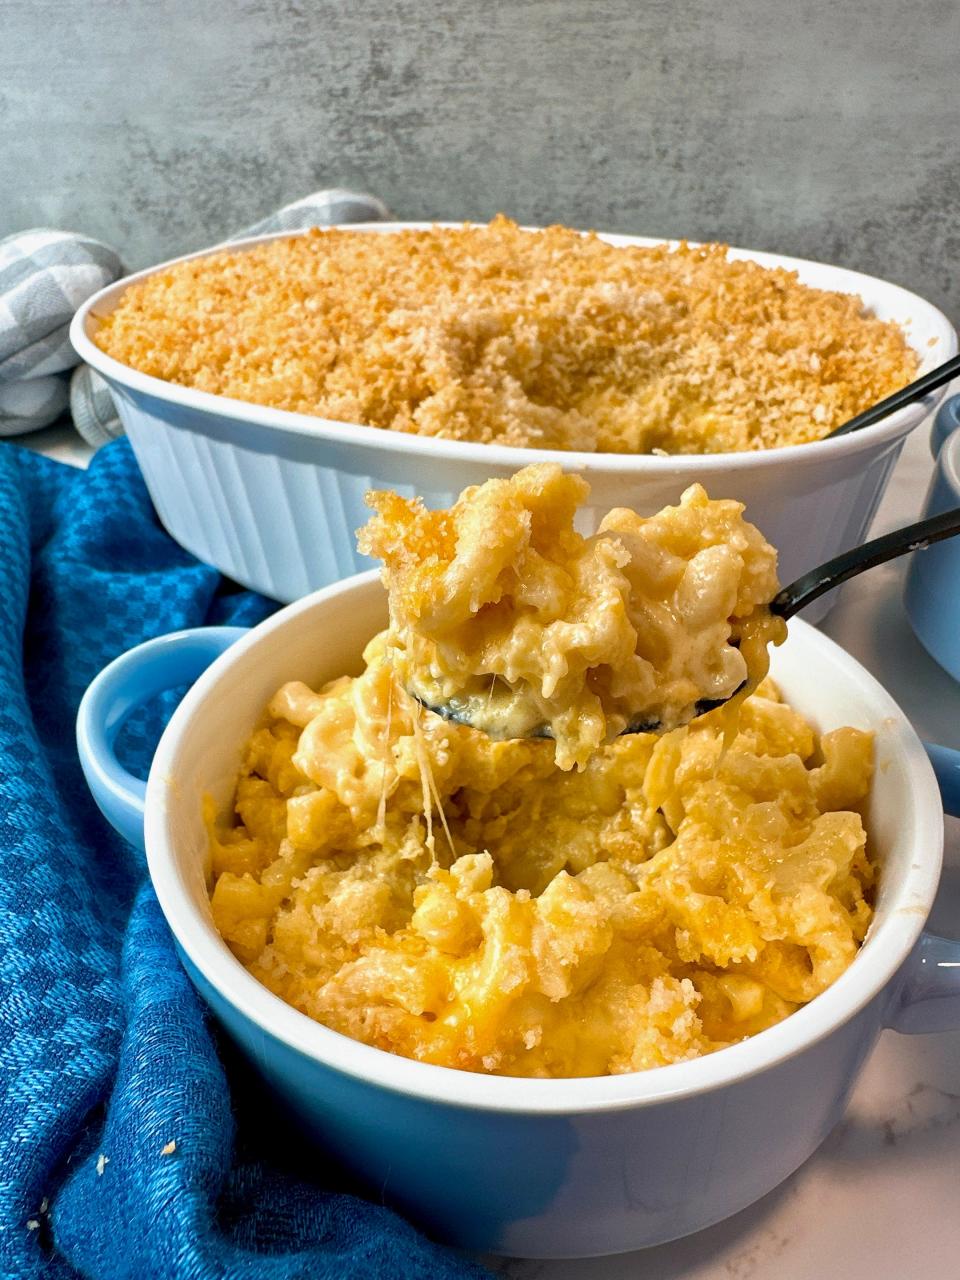 Super cheesy, baked homemade mac and cheese is a breeze to make.